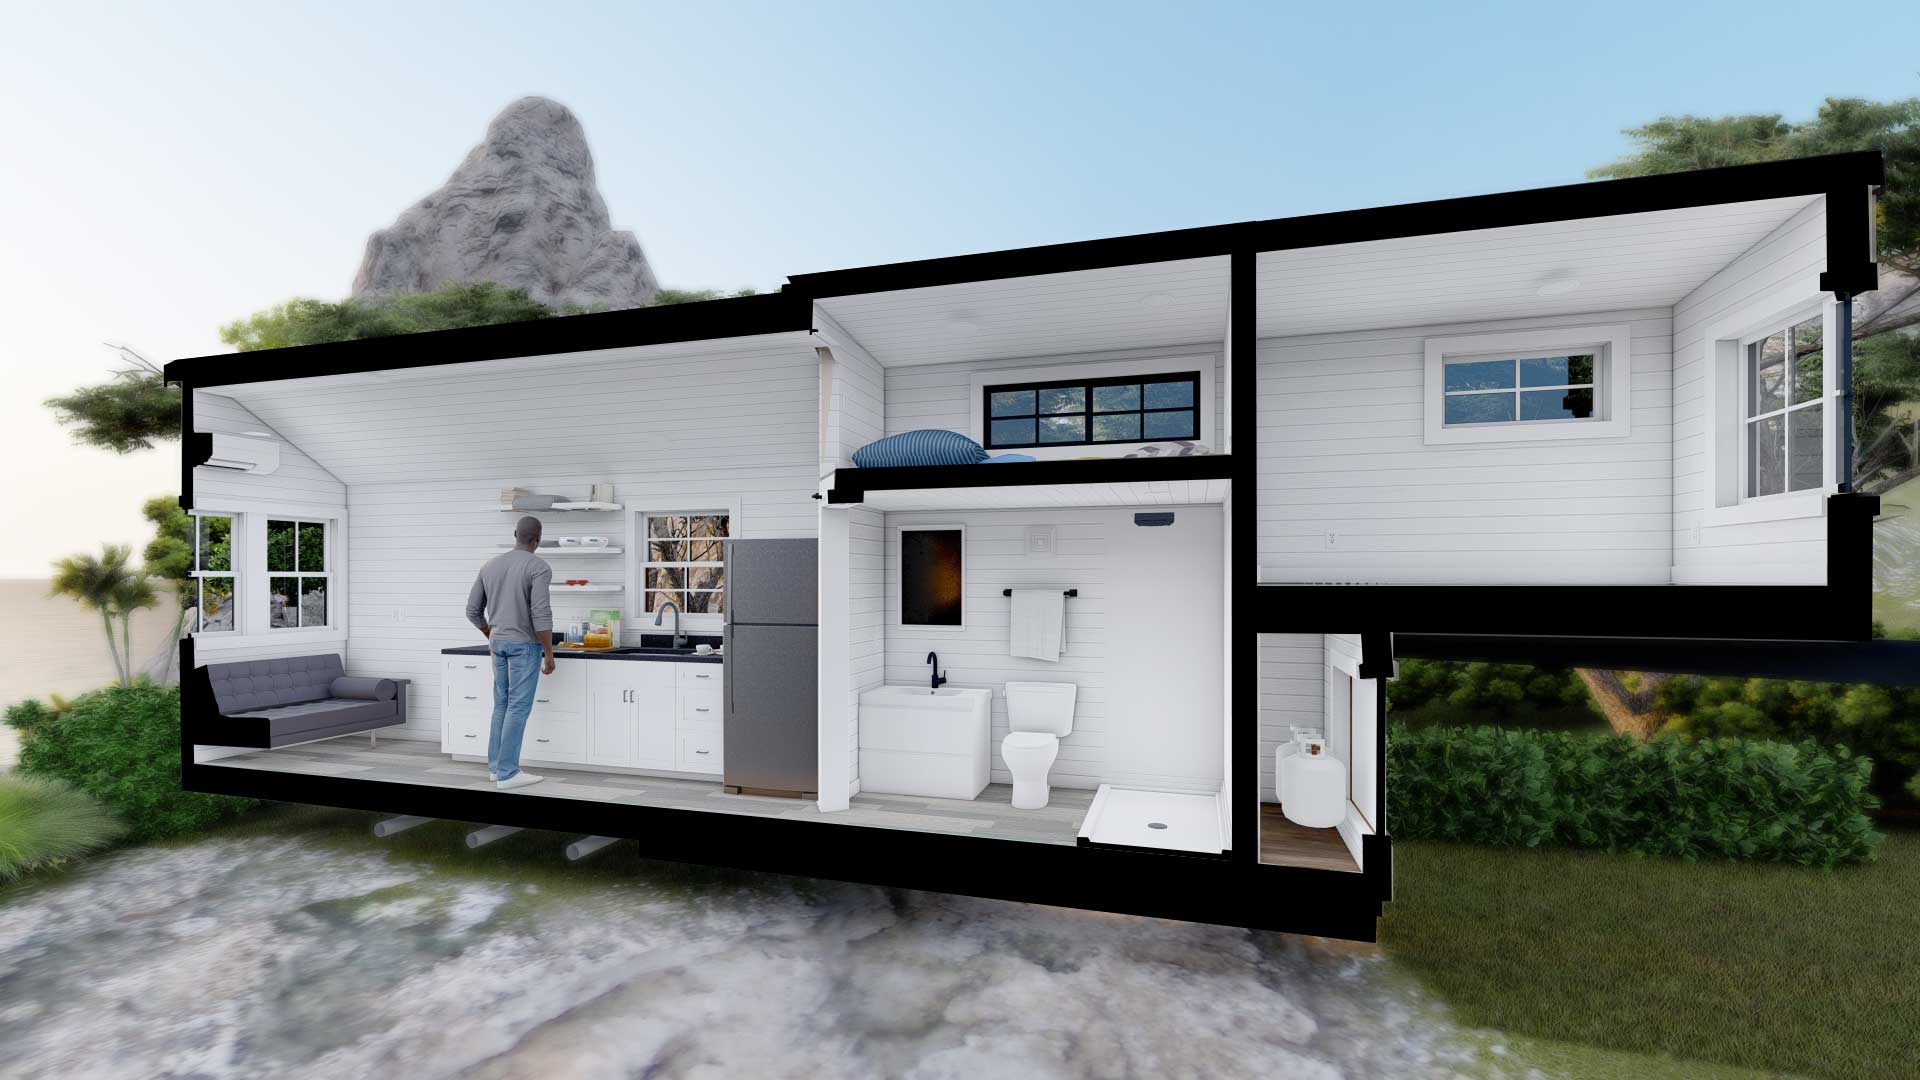 A cutaway 3D model showing the interior of a Majesty tiny home